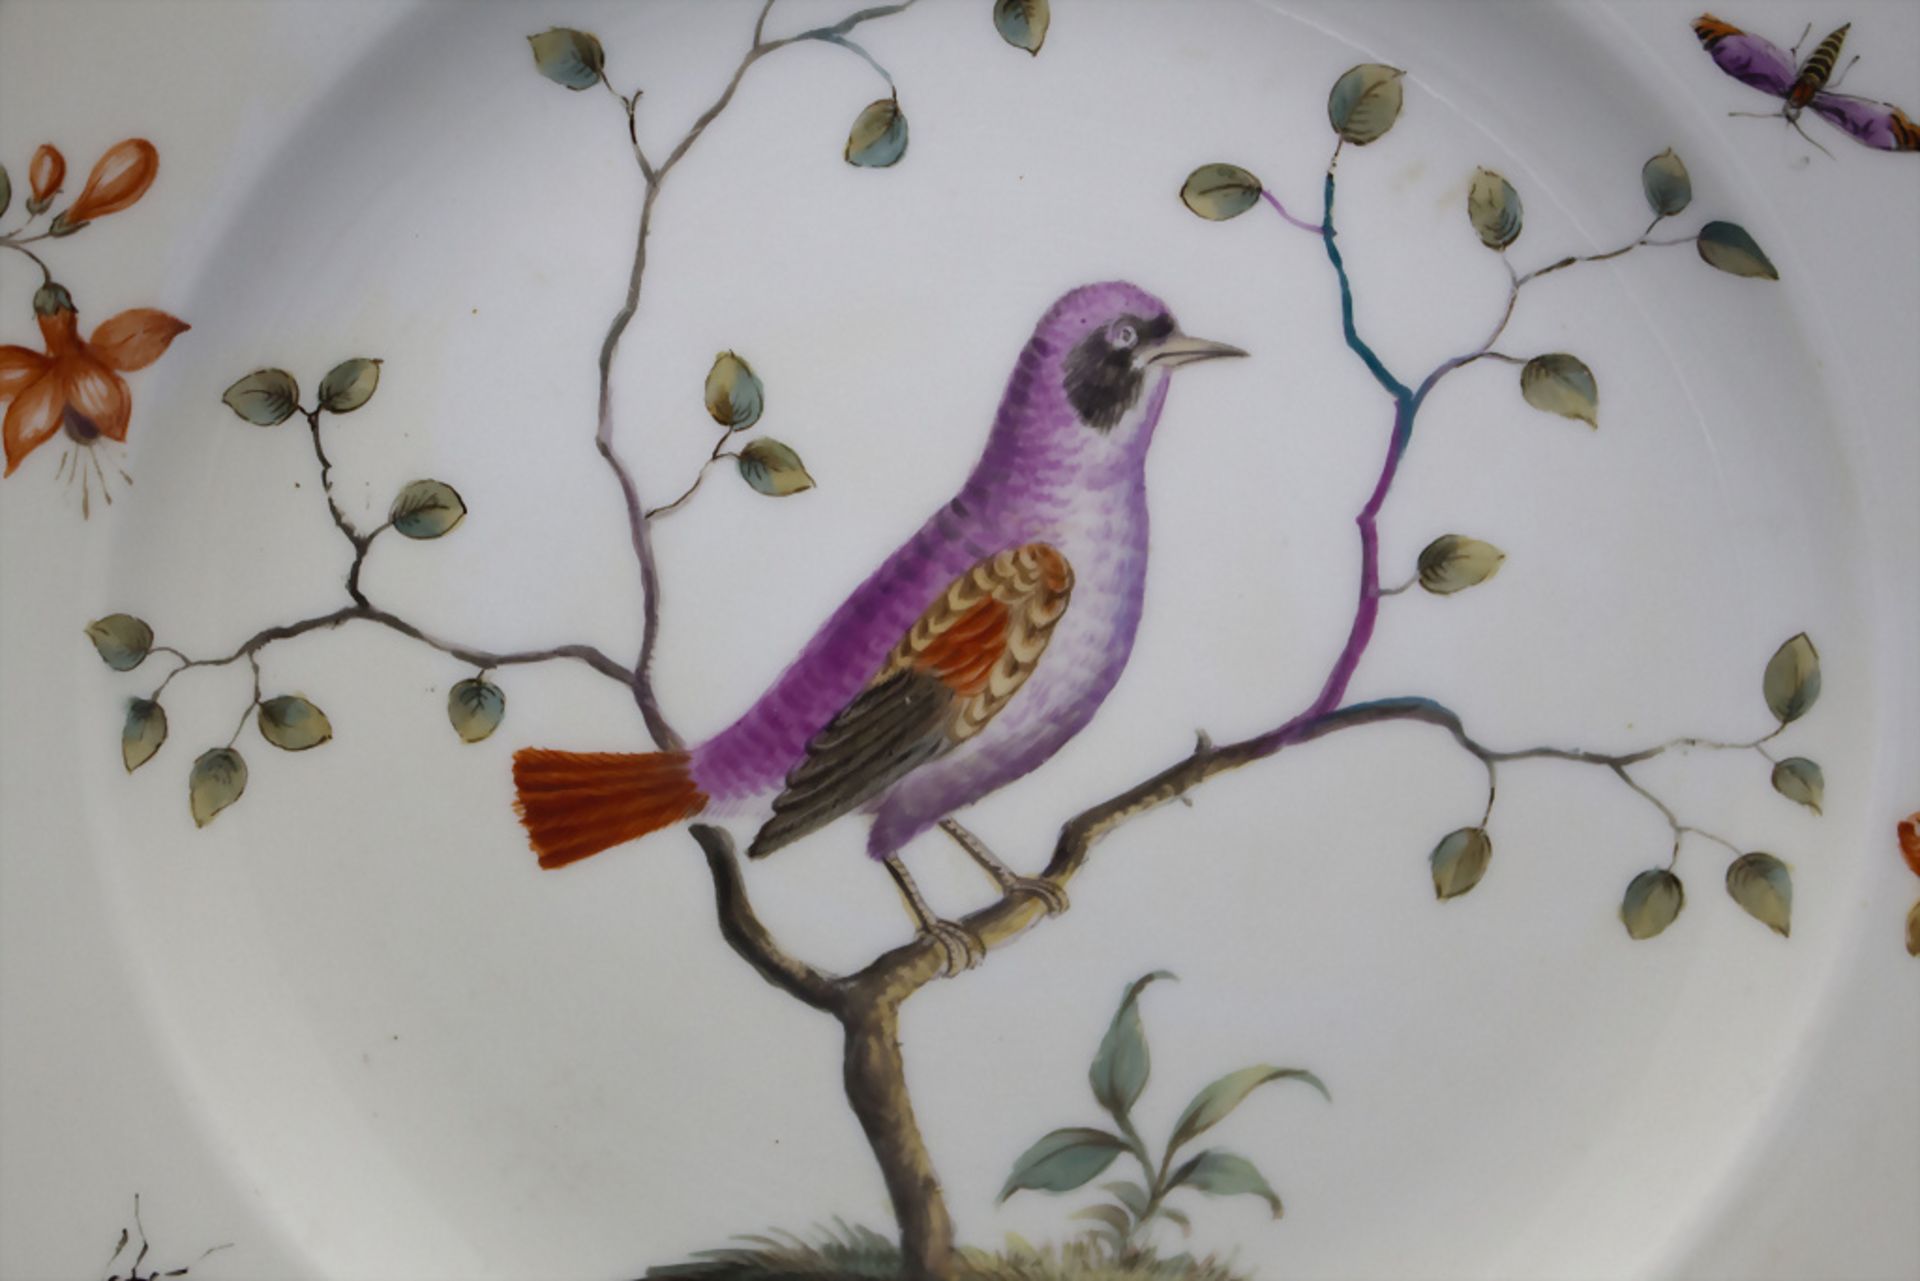 Teller mit Vogel- und Insektenmalerei / A plate with a bird and insects, Meissen, um 1880 - Image 3 of 3